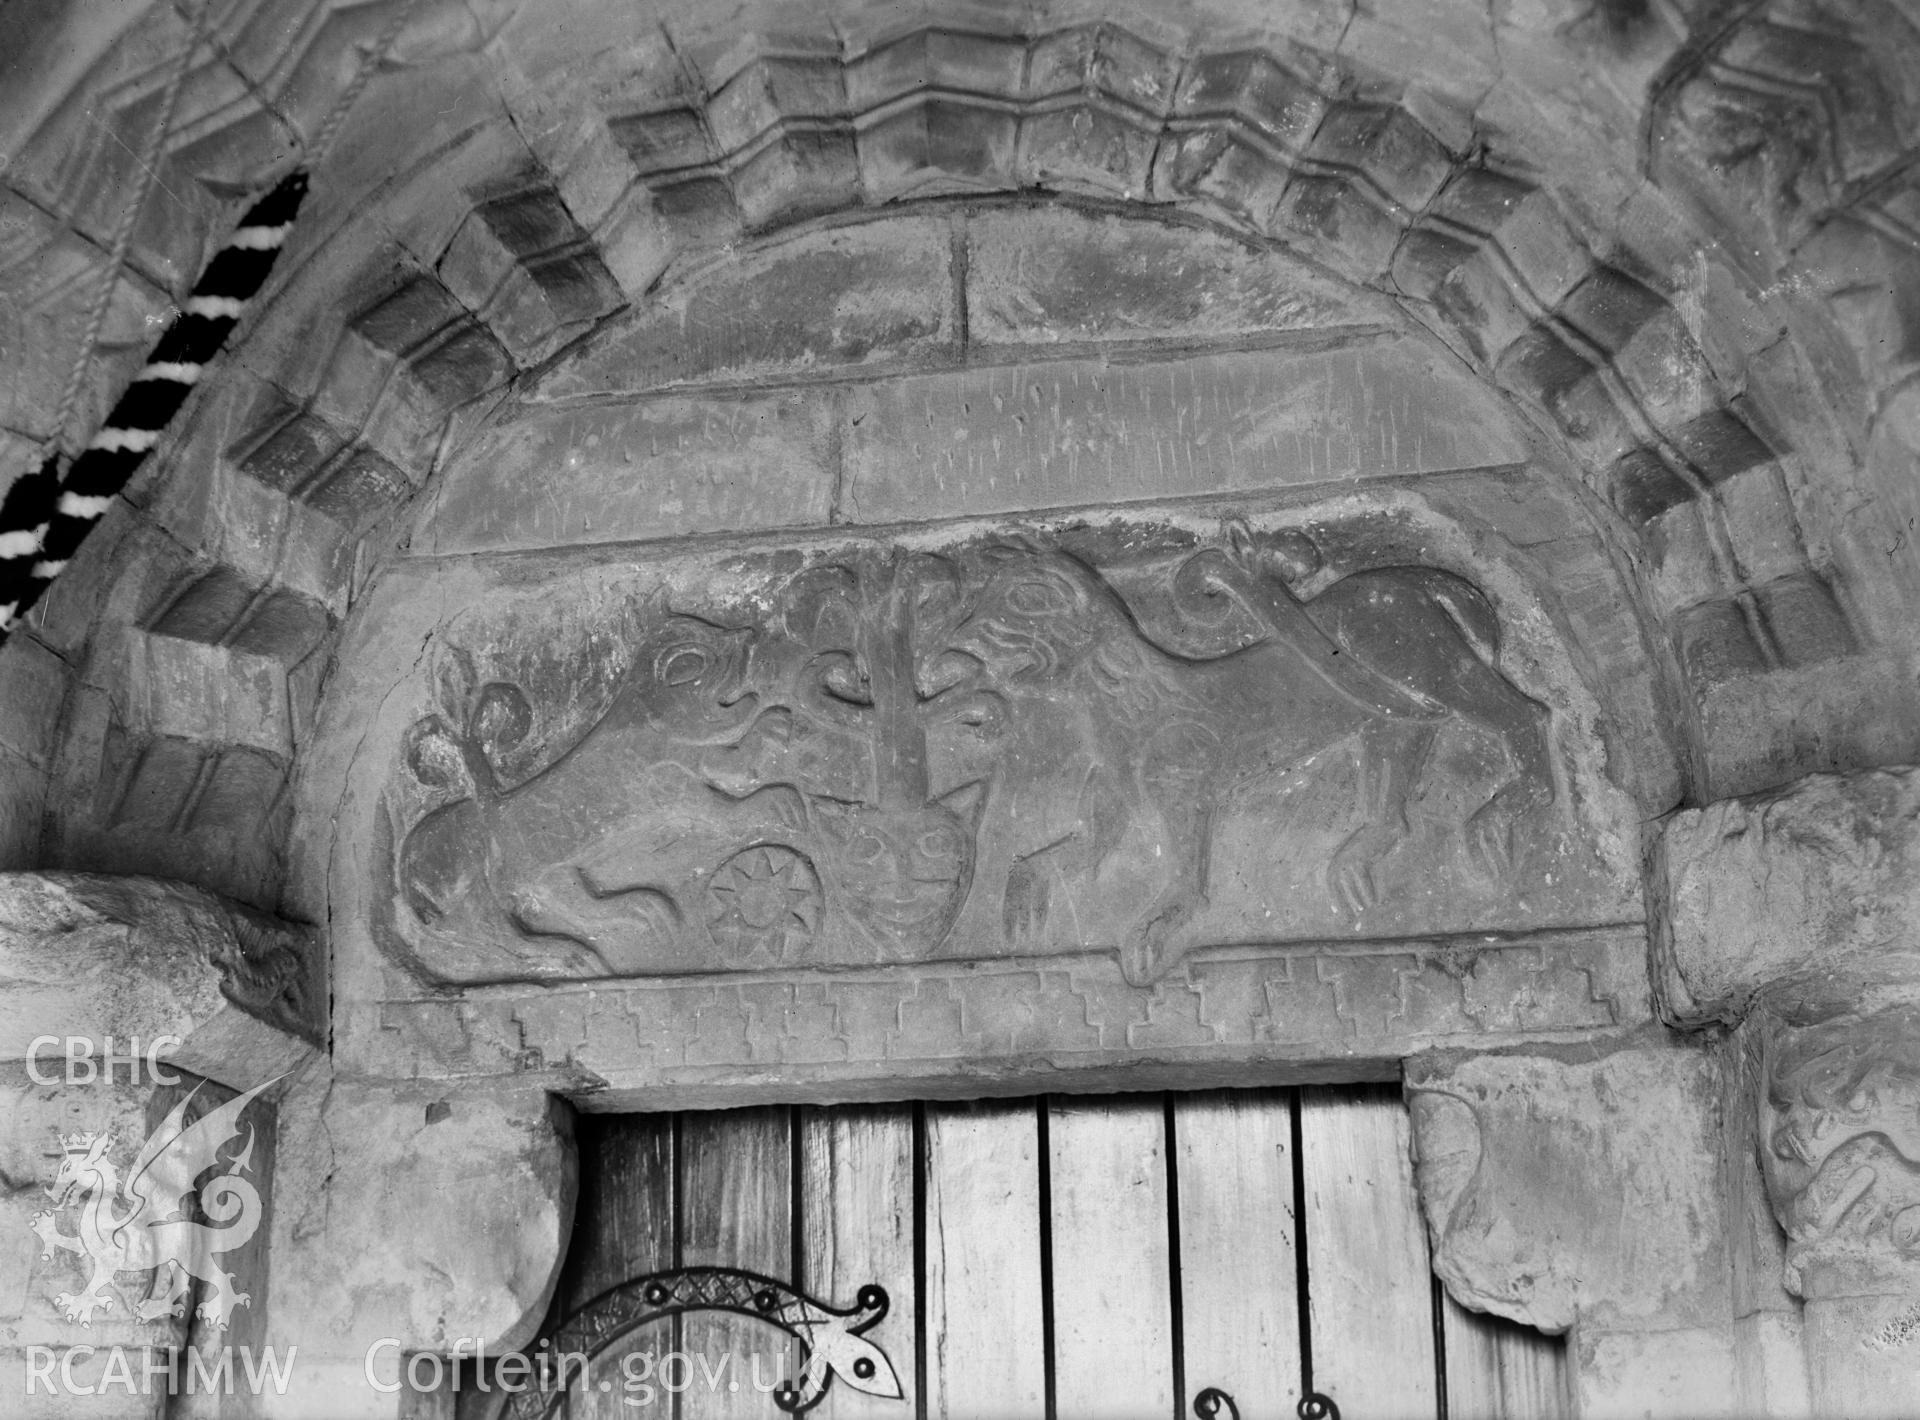 View of stone carving above the door entrance to Llanbadarn Fawr Church, Radnorshore taken by W A Call circa 1937.